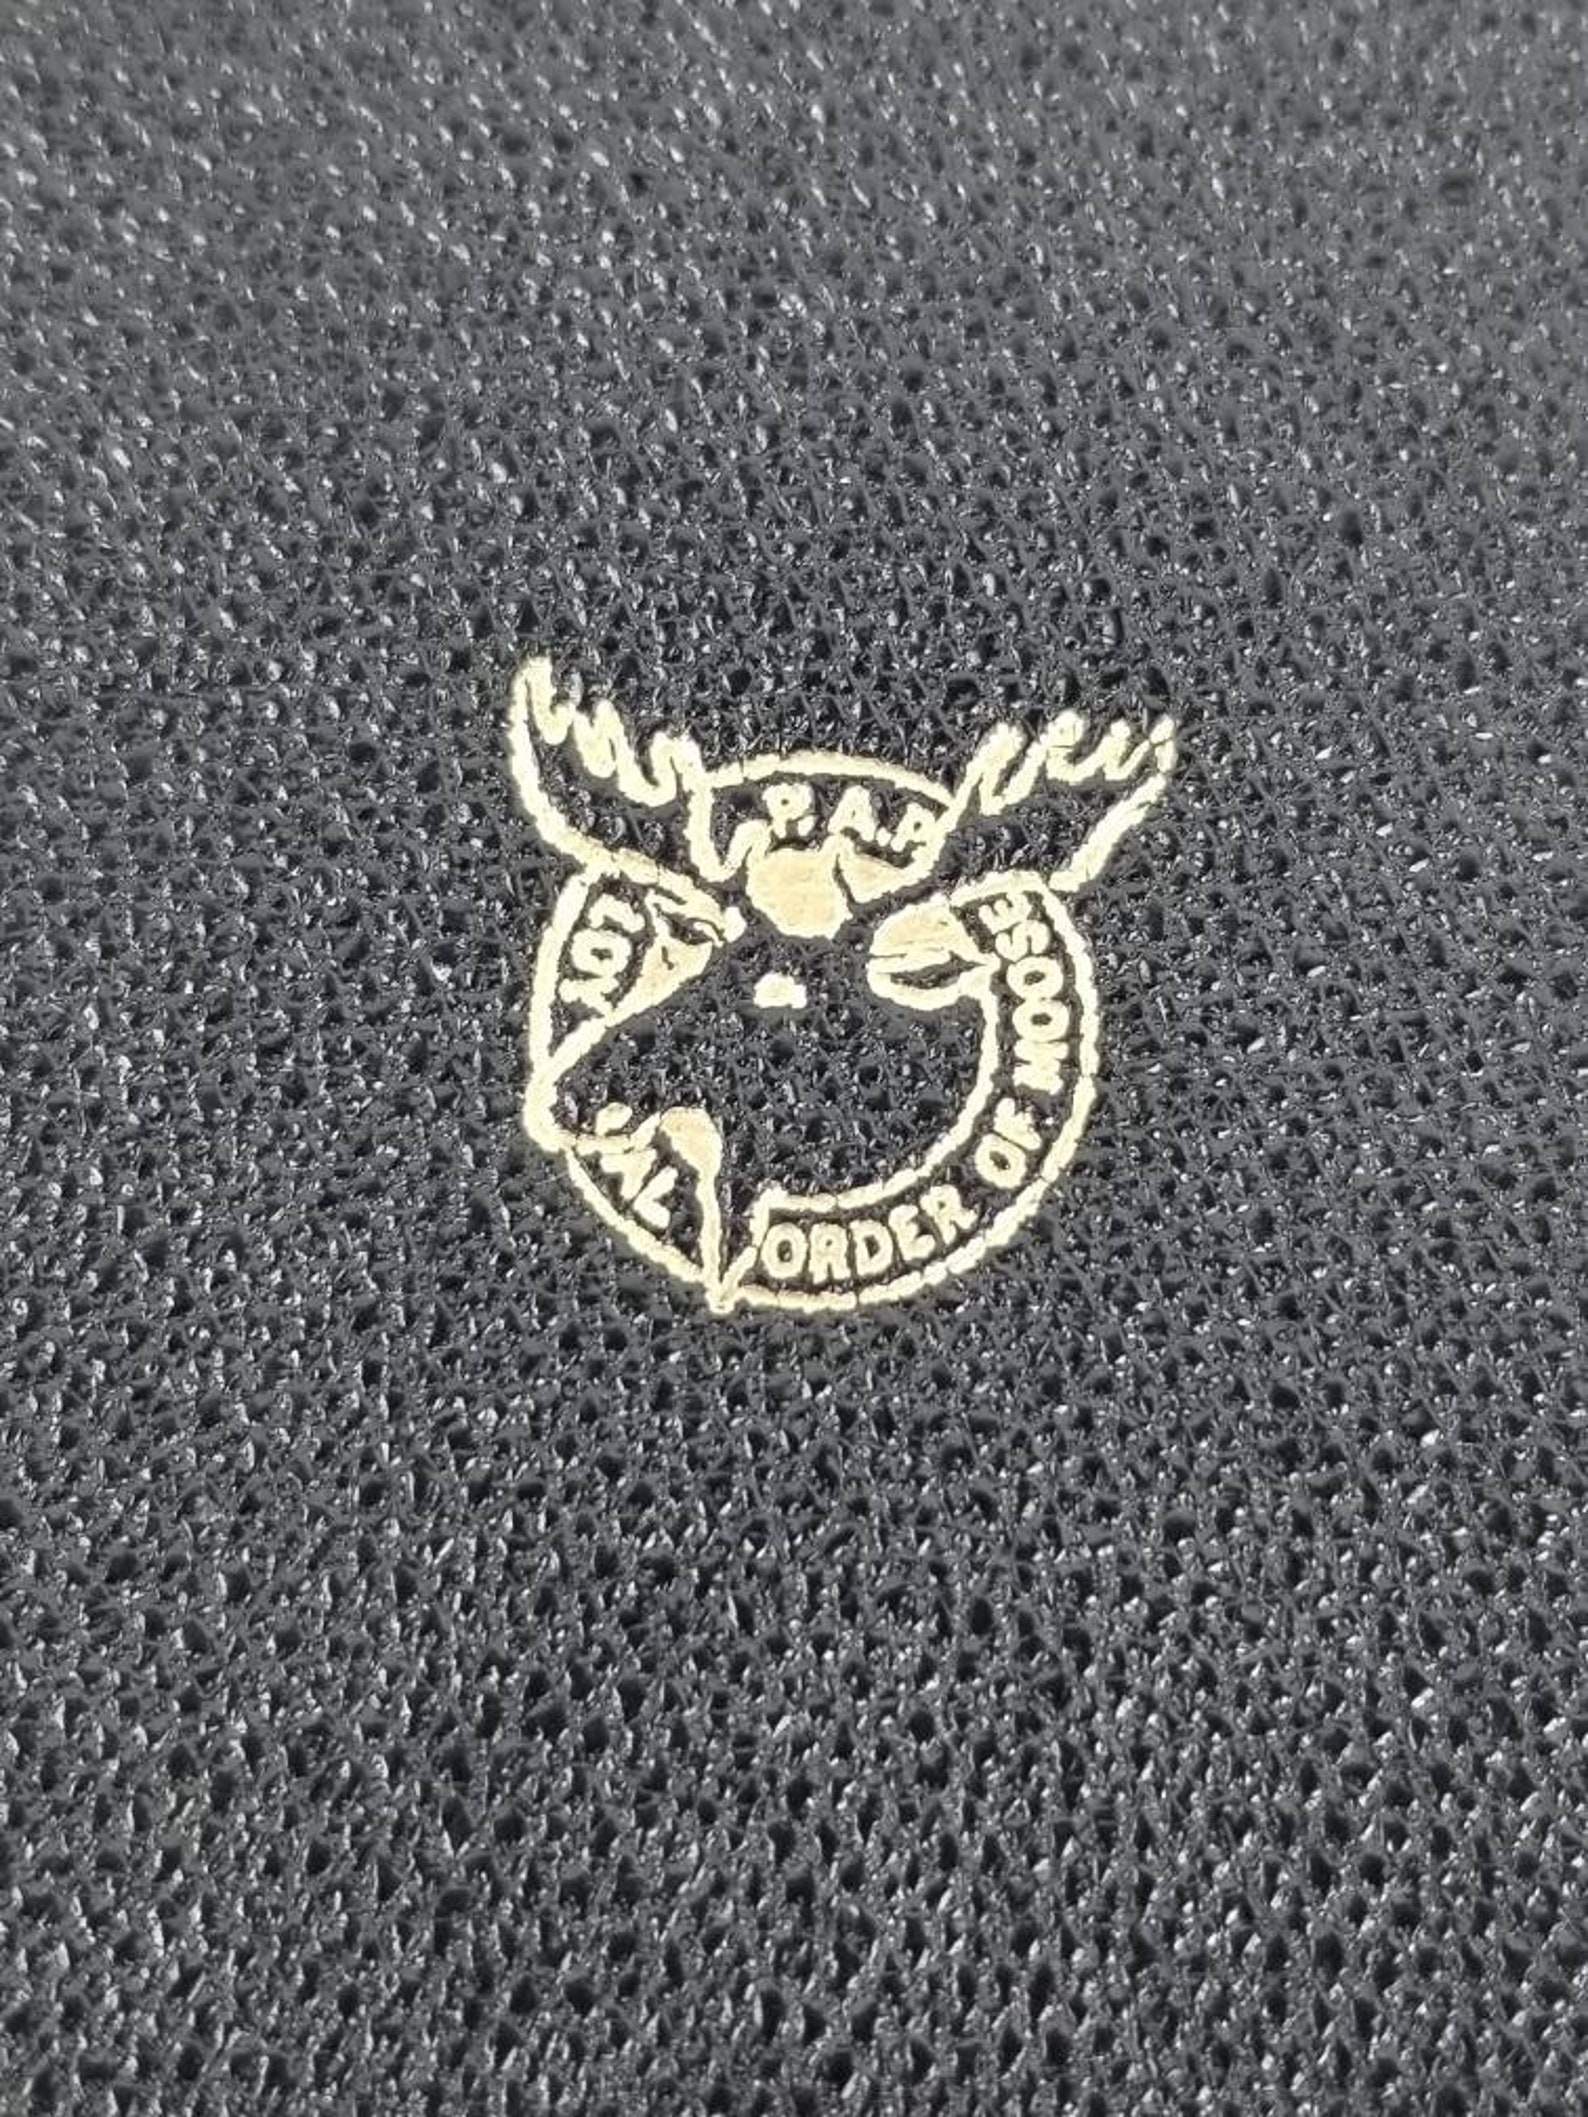 Loyal Order of Moose PAP Key Case Leather 1940s Trade Union | Etsy